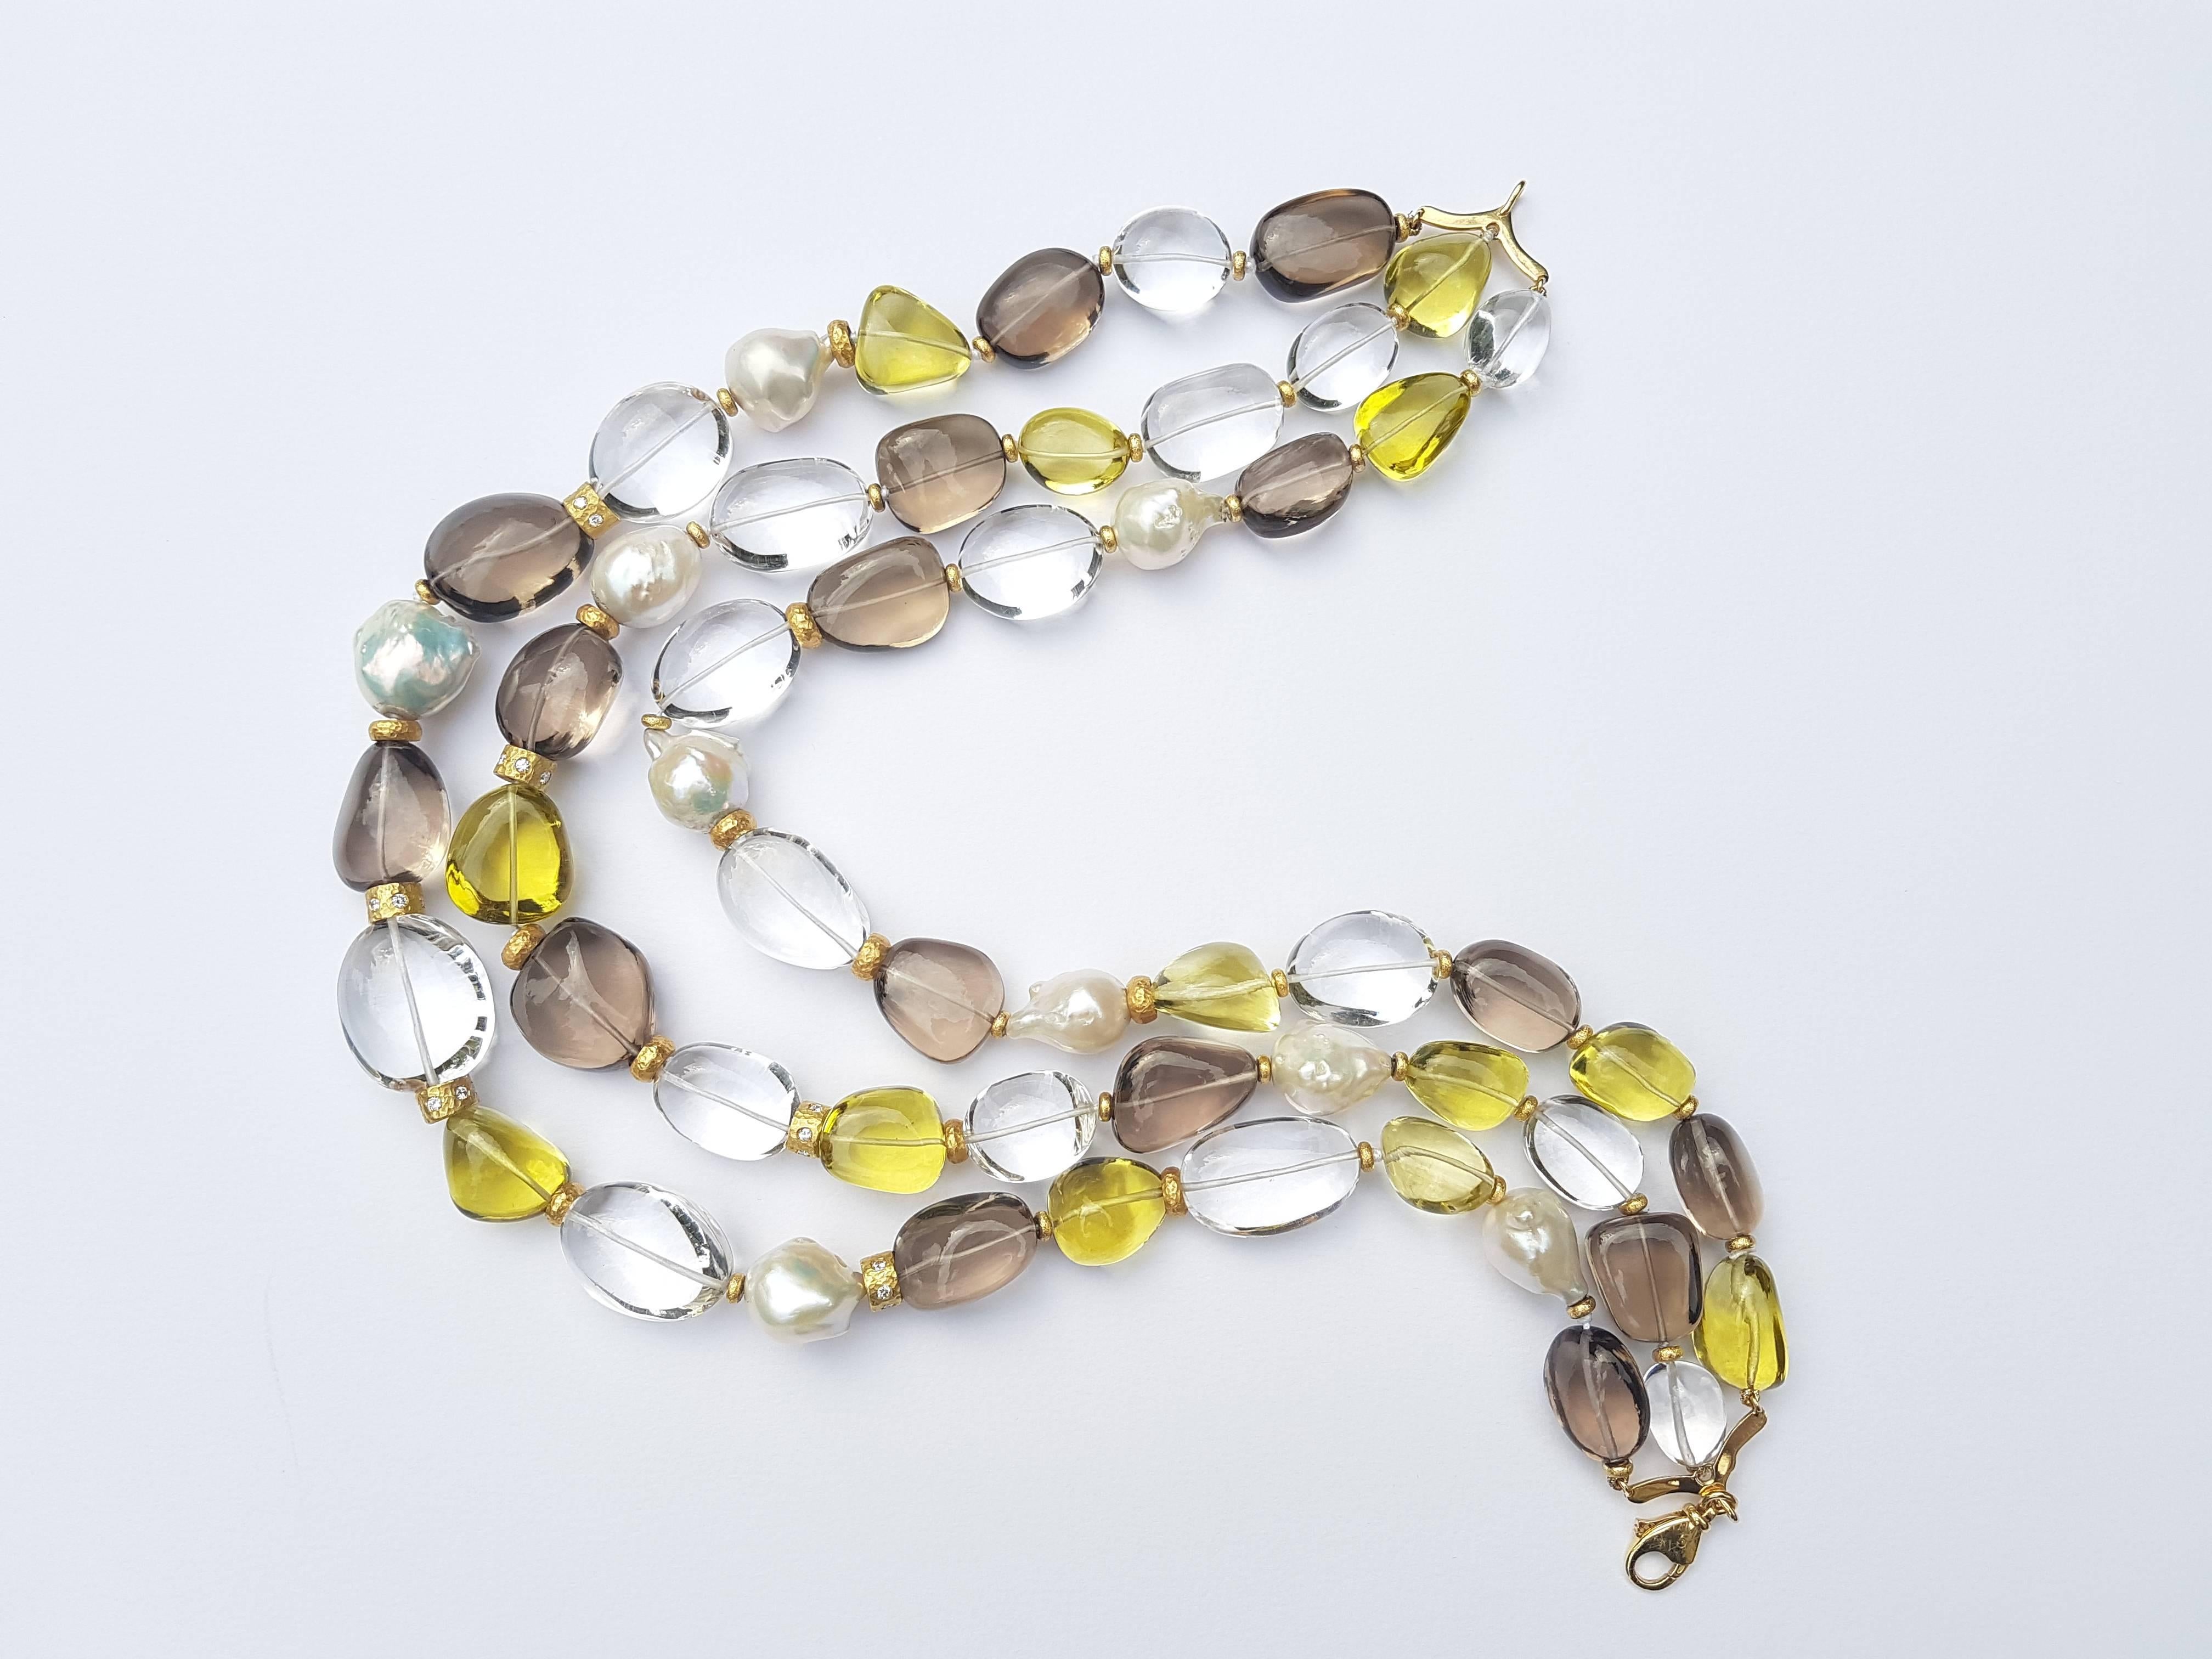 Beautiful Statement three-strand necklace in 18kt yellow Gold and 1.25 carats of Diamonds with amazing hand cut Lemon Topaz , Rock Crystal and Smoky Quartz .